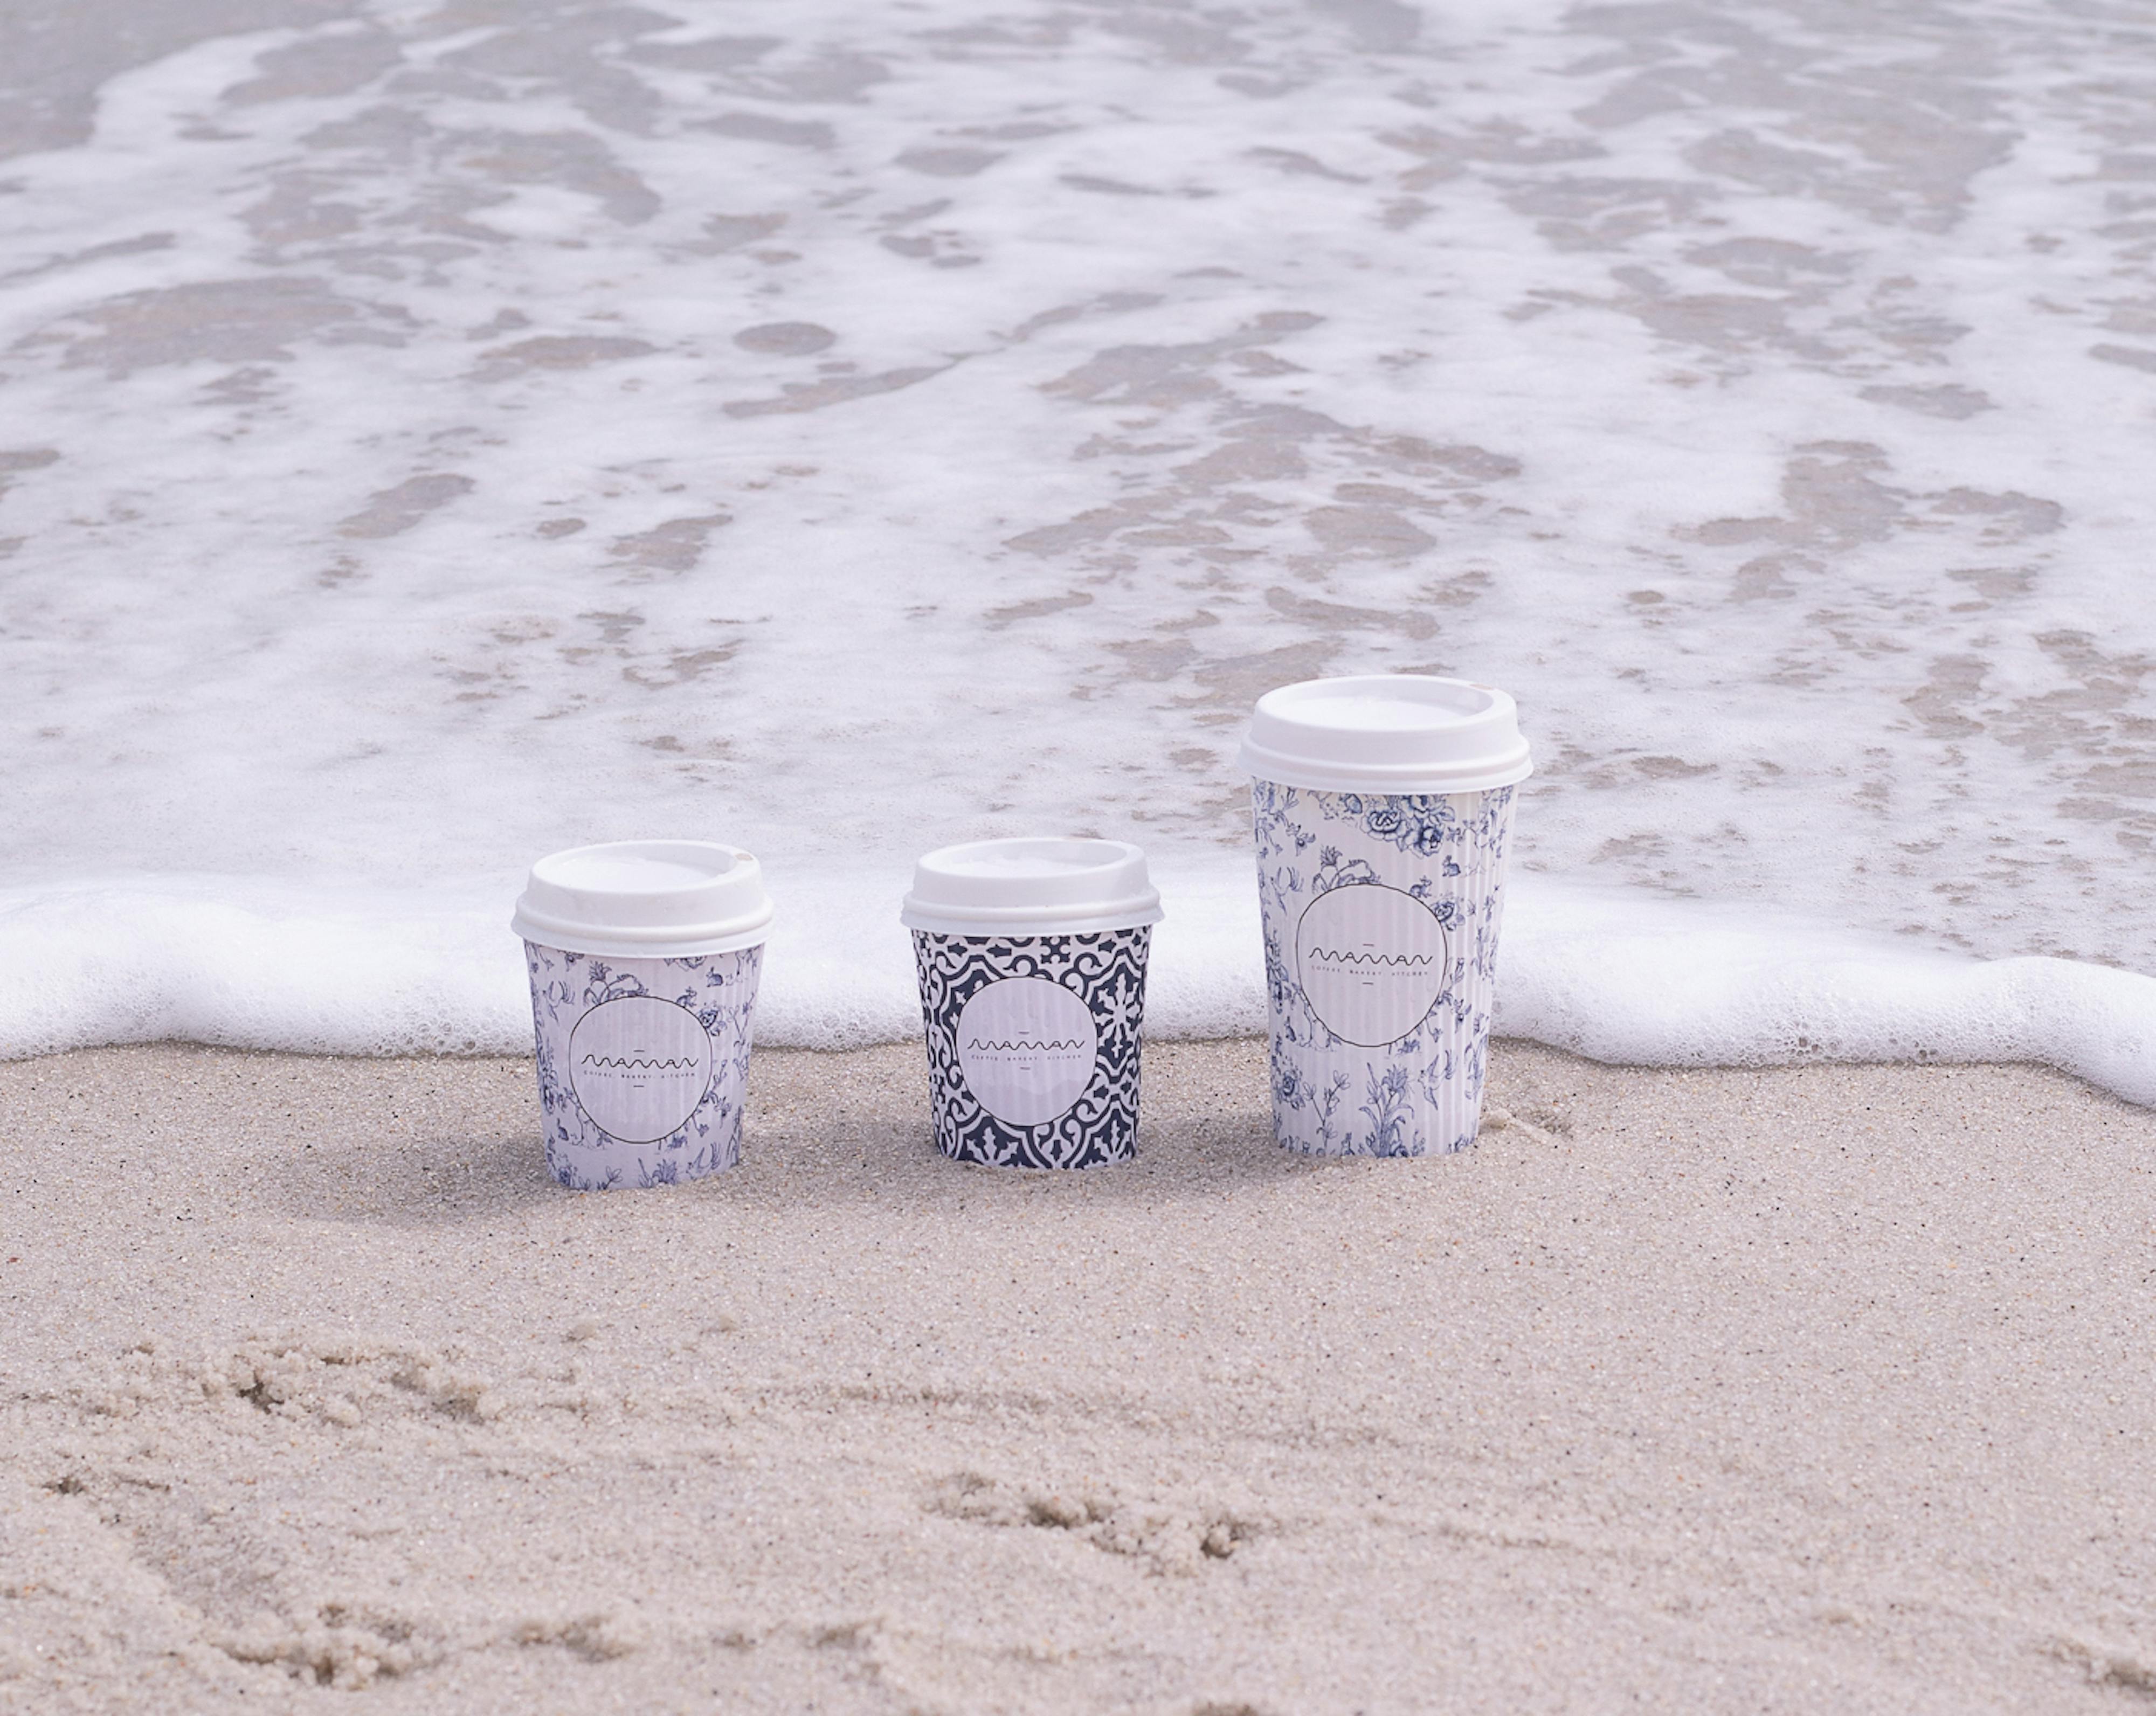 maman cups in the sand on the beach with wave